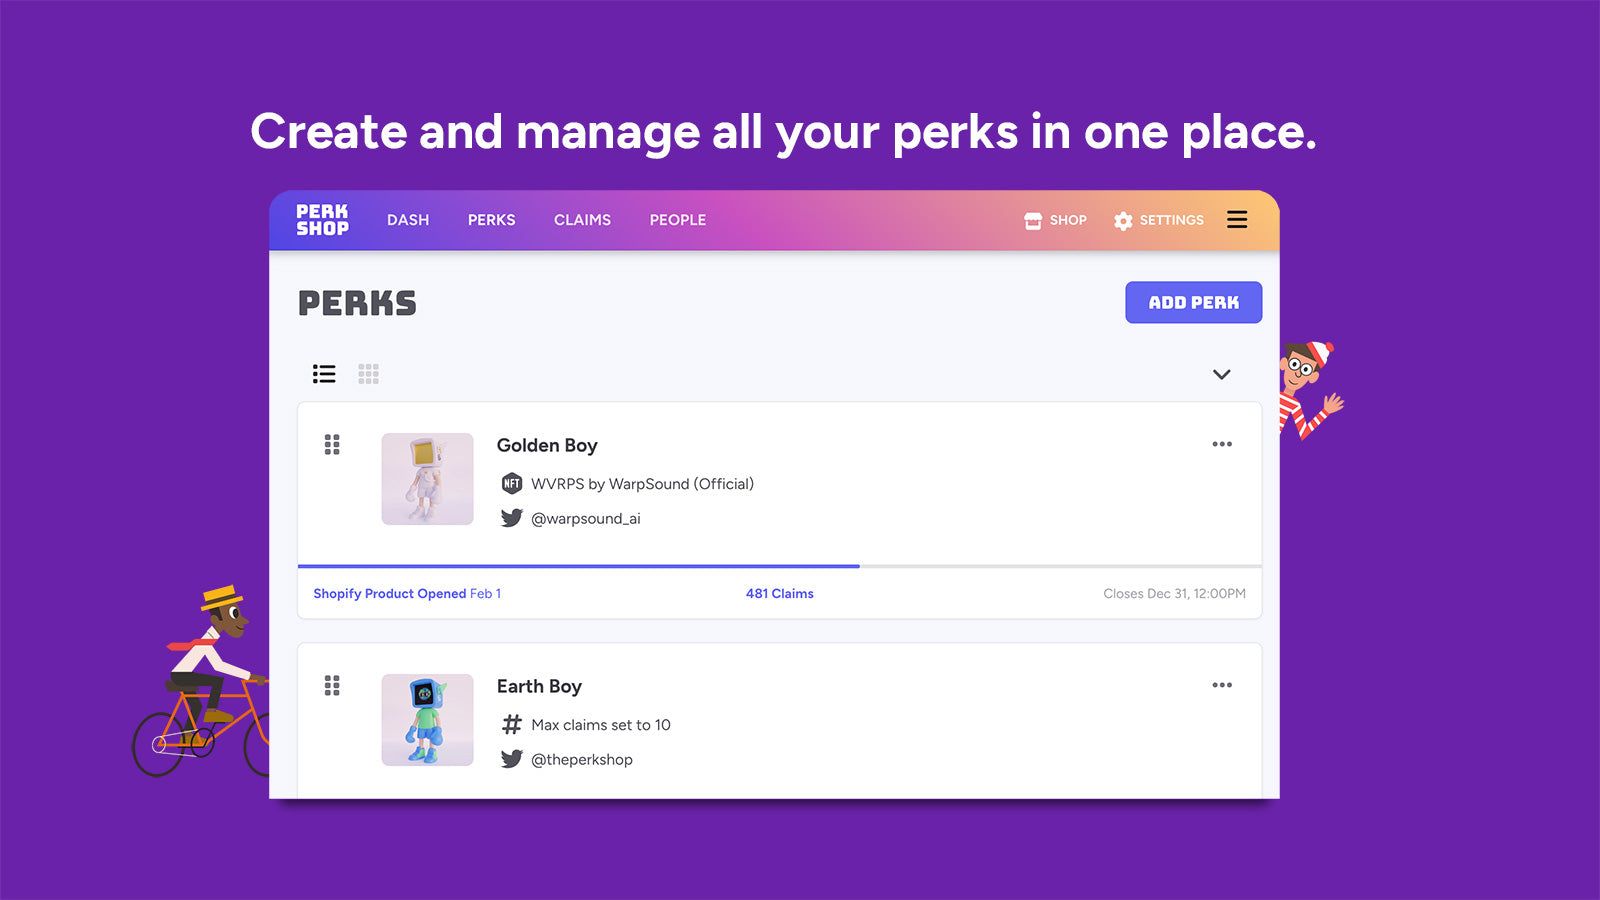 Create and manage all your perks in one place.